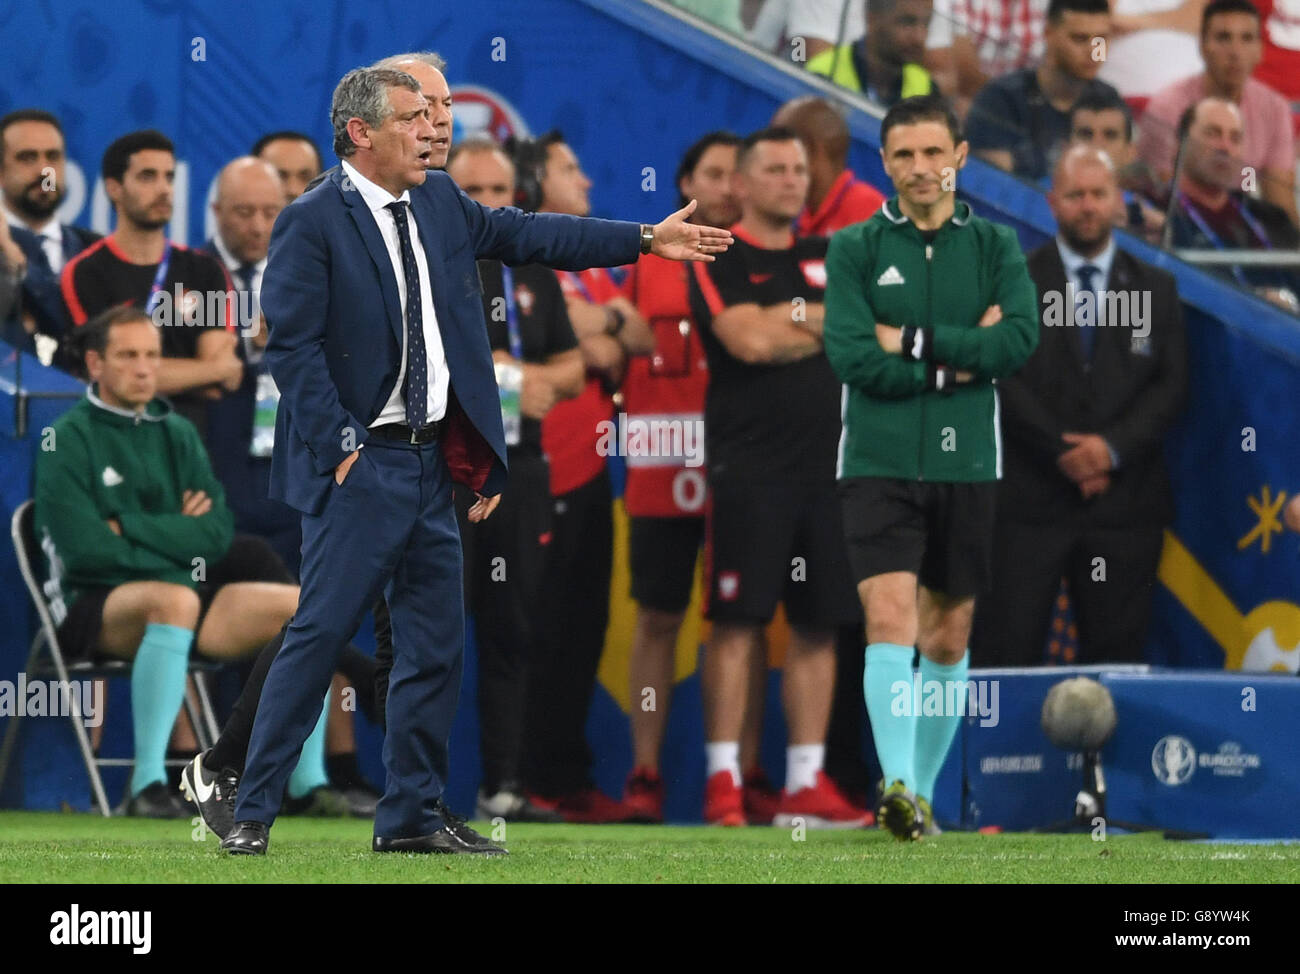 Marseille, France. 30th June, 2016. Coach Fernando Santos (L) of Portugal gestures during the UEFA EURO 2016 quarter final soccer match between Poland and Portugal at the Stade Velodrome in Marseille, France, 30 June 2016. Photo: Federico Gambarini/dpa/Alamy Live News Stock Photo